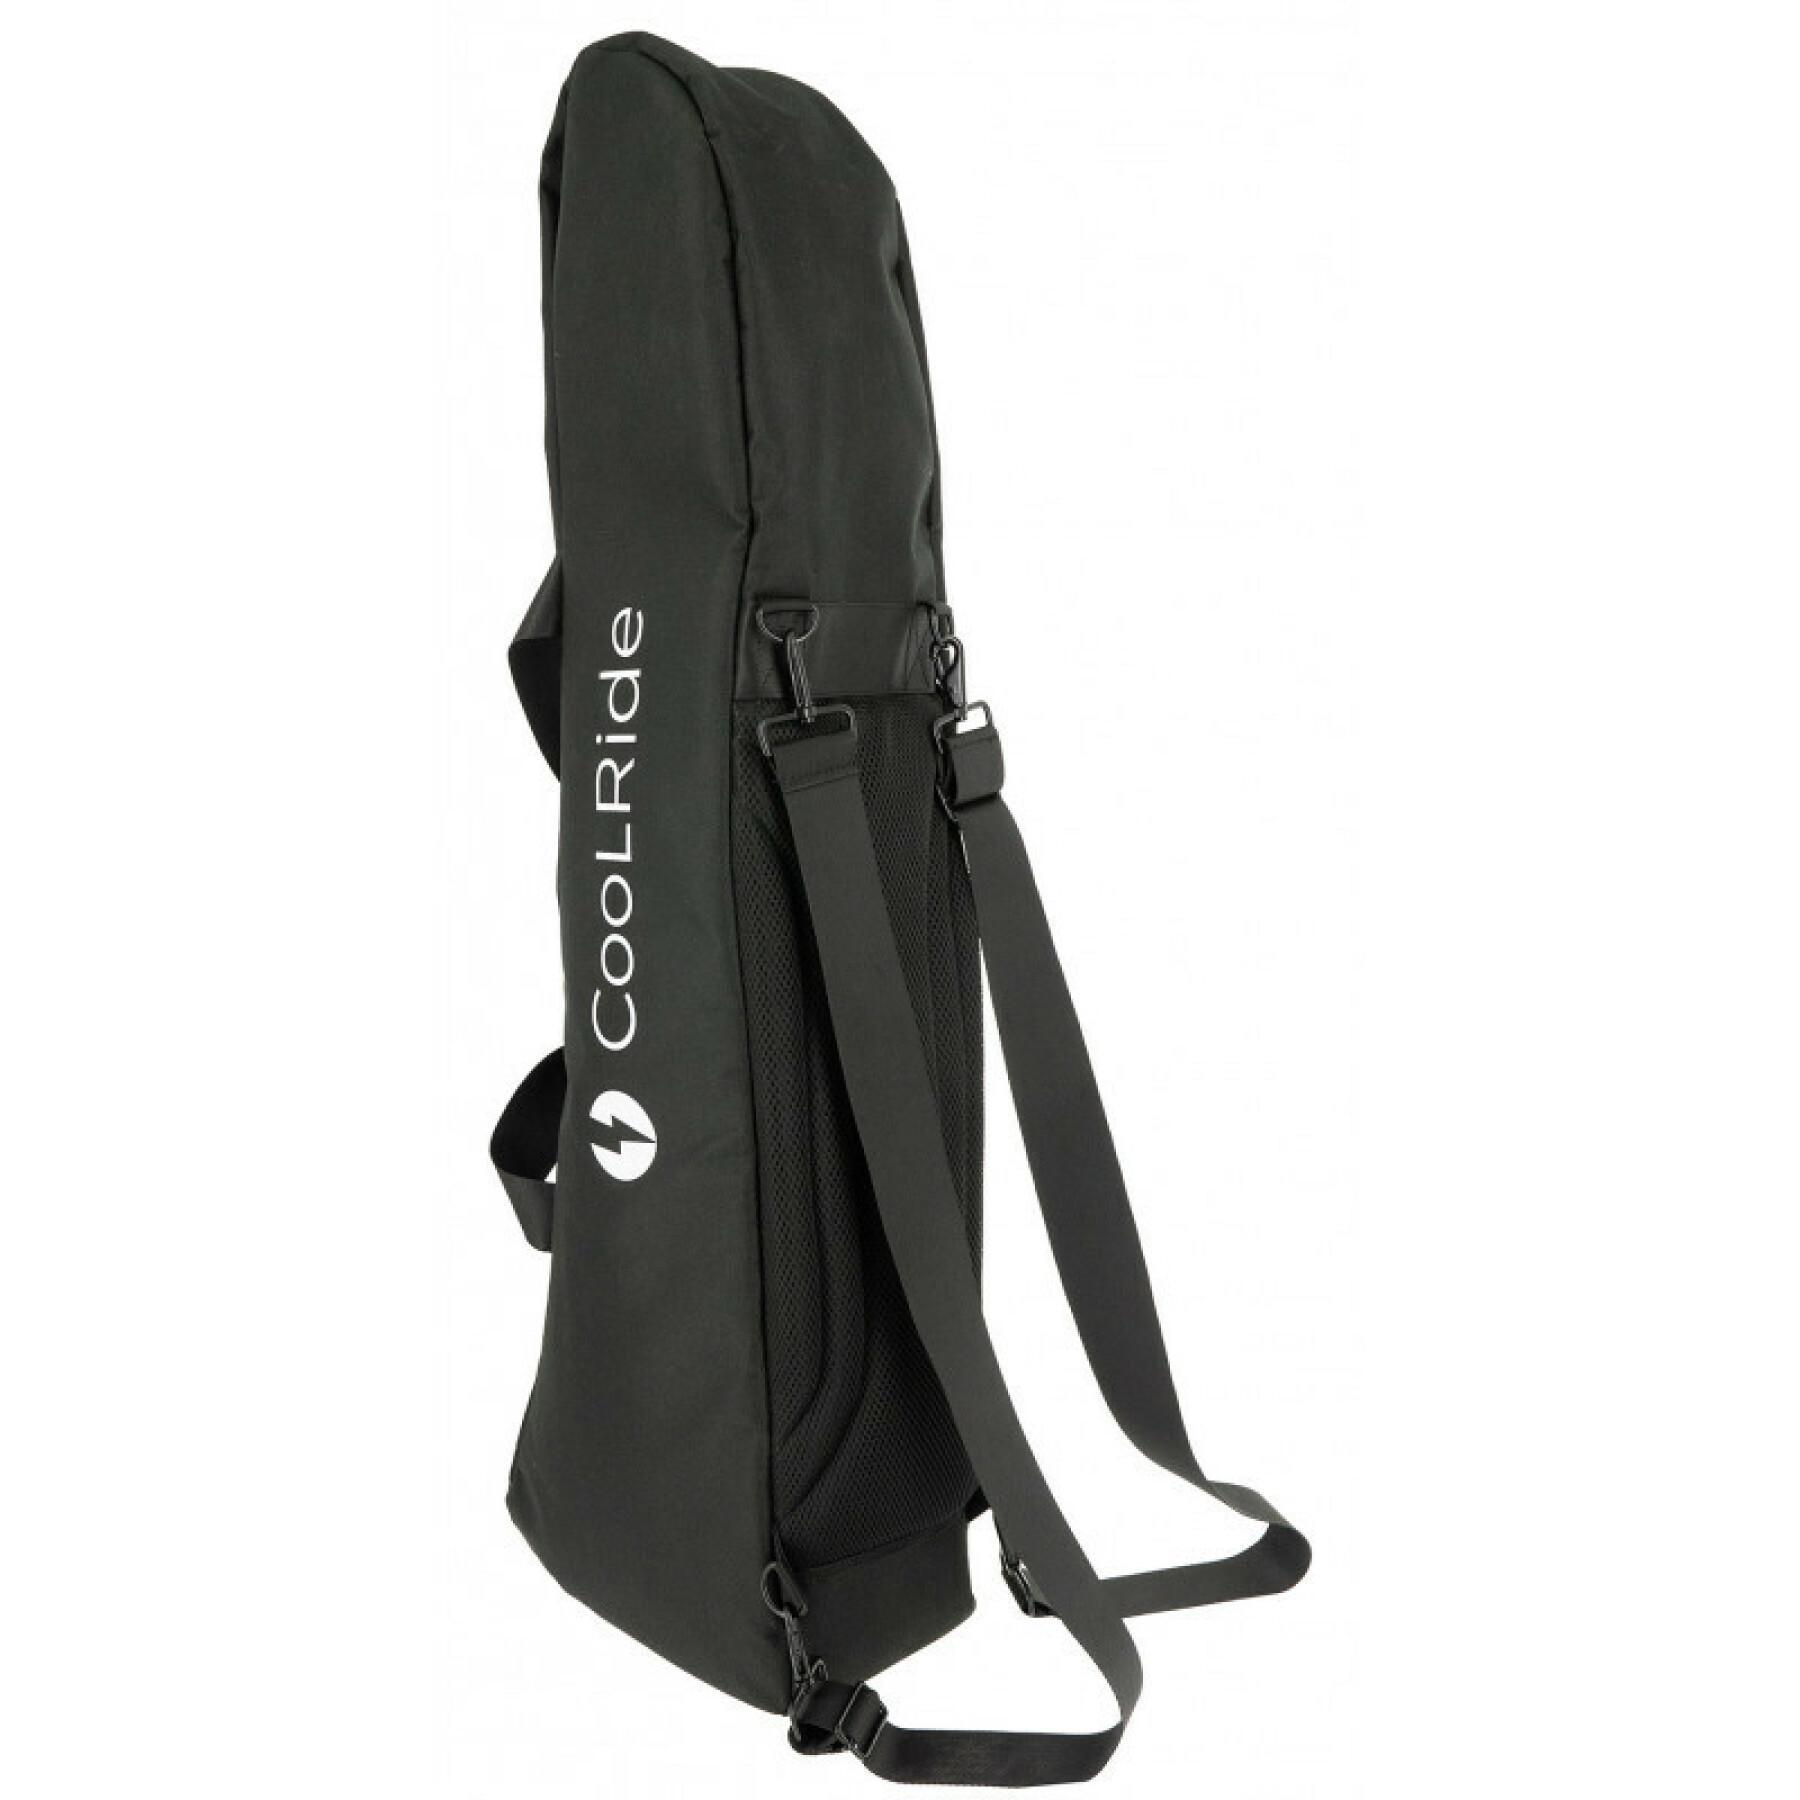 Scooter carrying bag 95 x 27 x 16 cm CoolRide